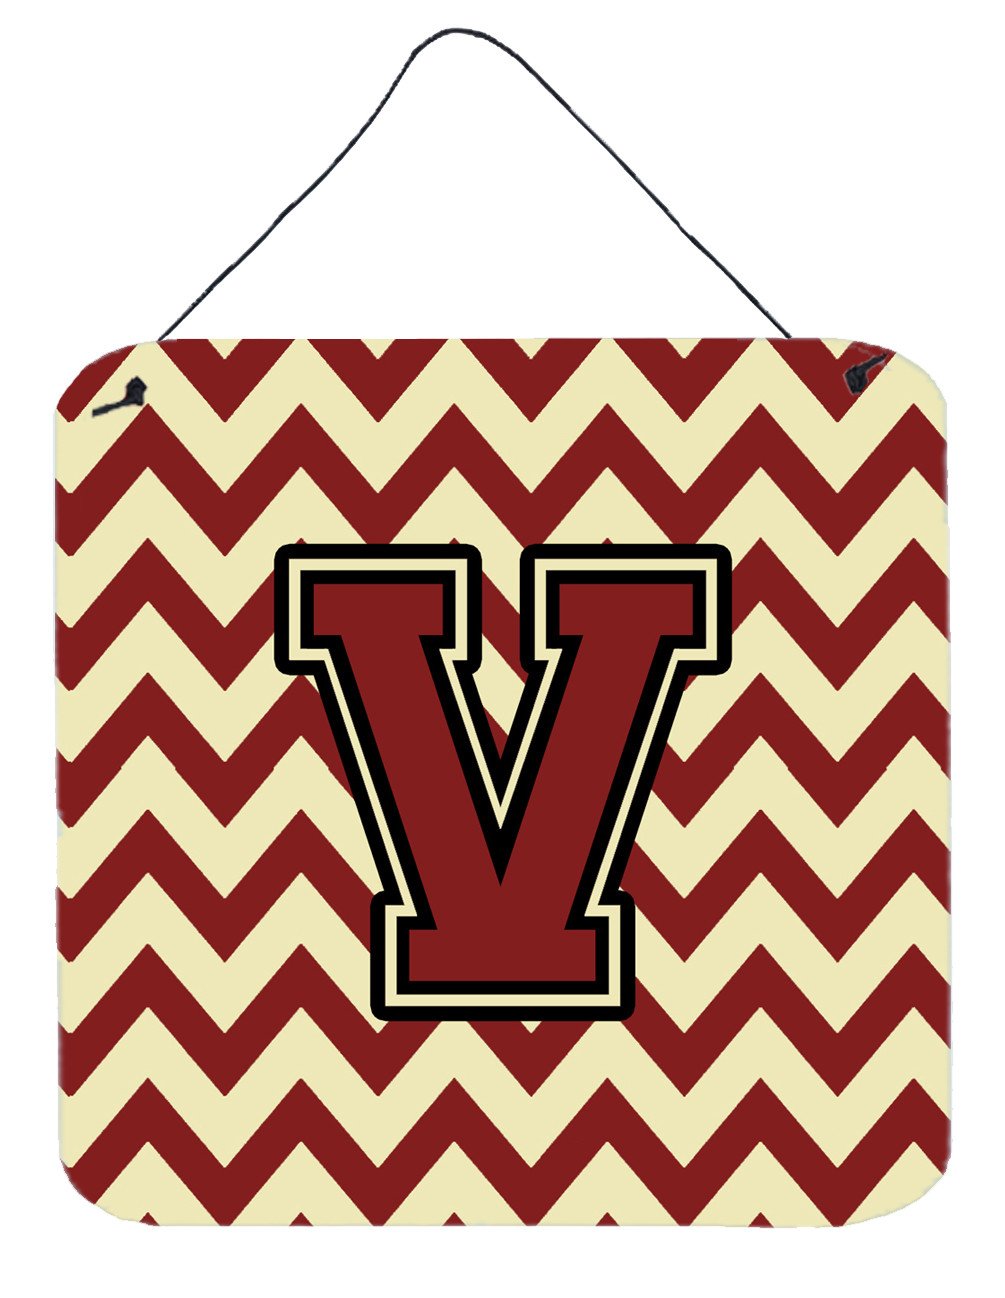 Letter V Chevron Maroon and Gold Wall or Door Hanging Prints CJ1061-VDS66 by Caroline's Treasures